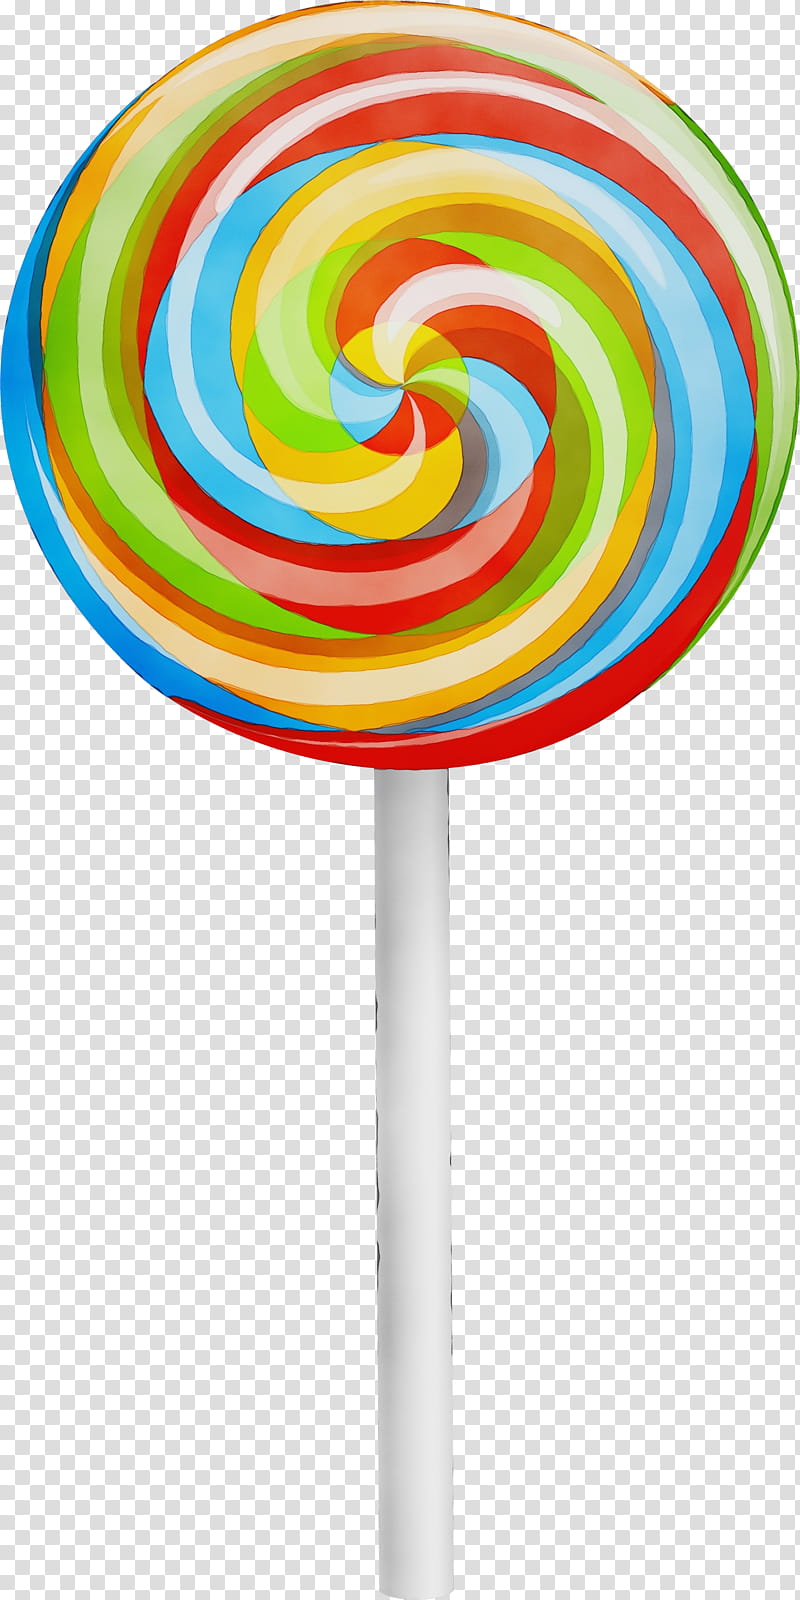 Lollipop, Watercolor, Paint, Wet Ink, Candy, Sweetness, Drawing, Chupa Chups transparent background PNG clipart